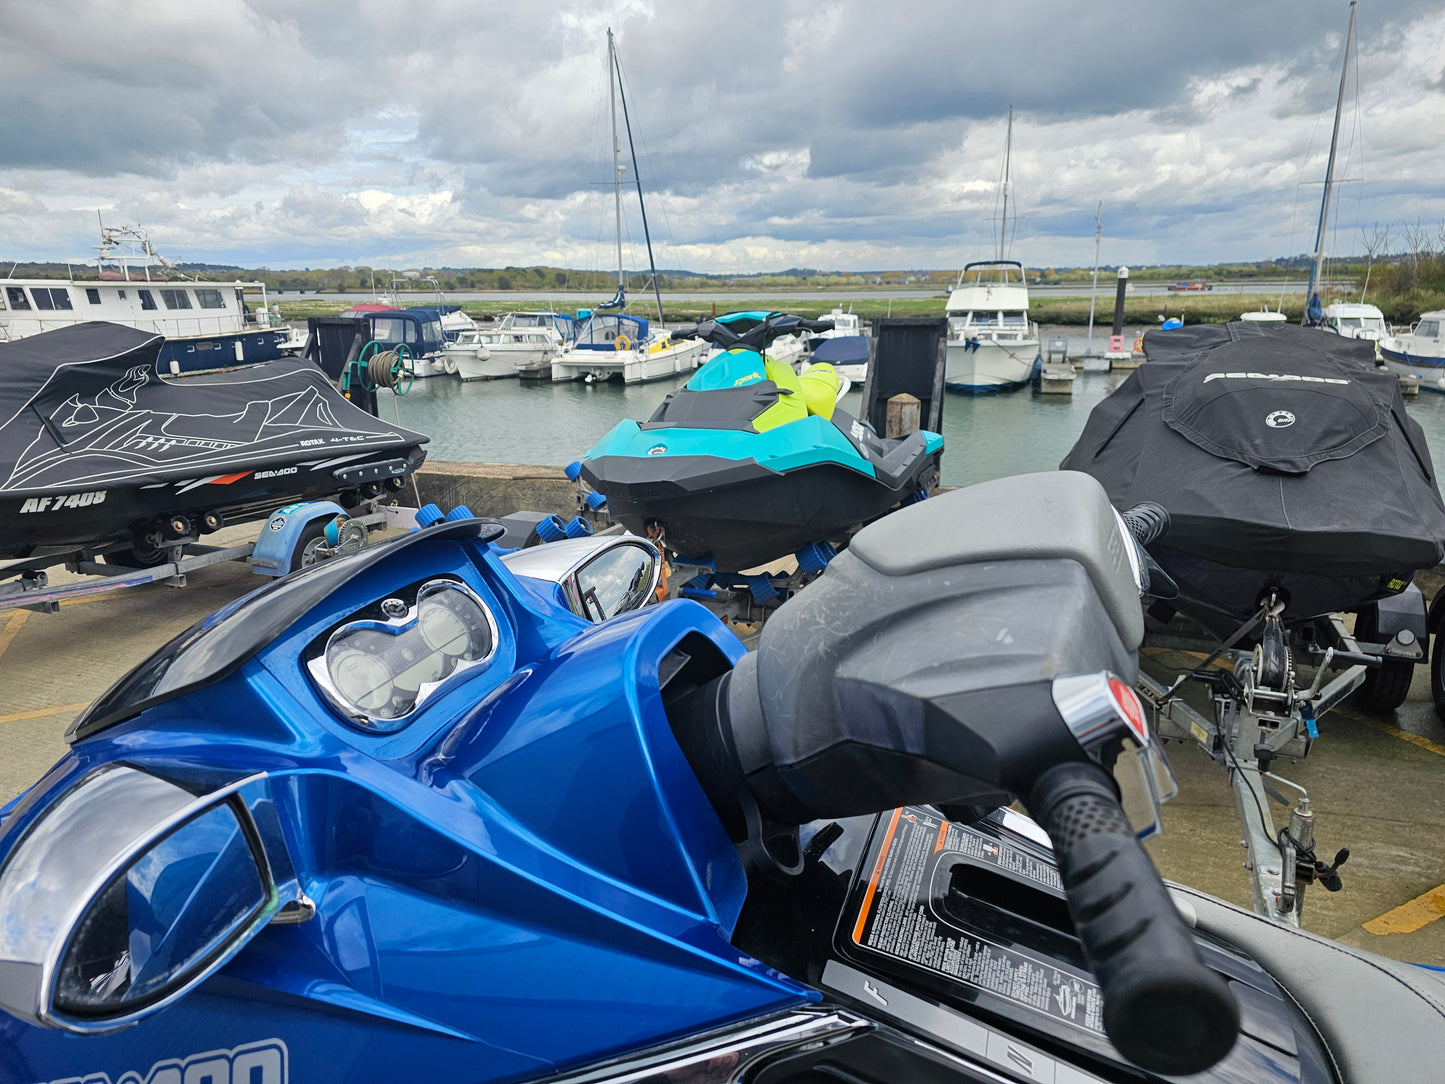 2007 Pre-owned Sea-Doo GTX Limited 215hp